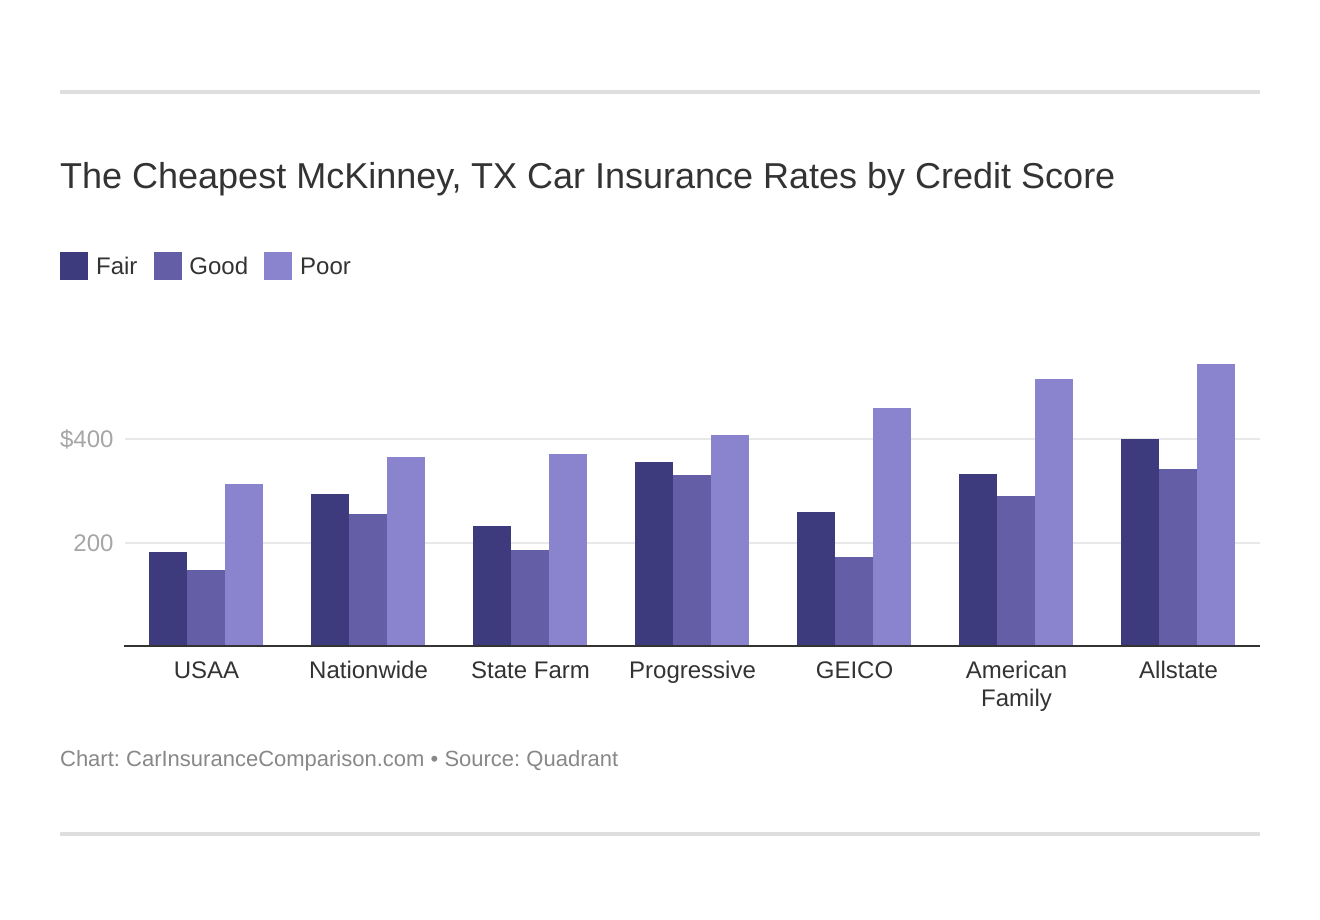 The Cheapest McKinney, TX Car Insurance Rates by Credit Score